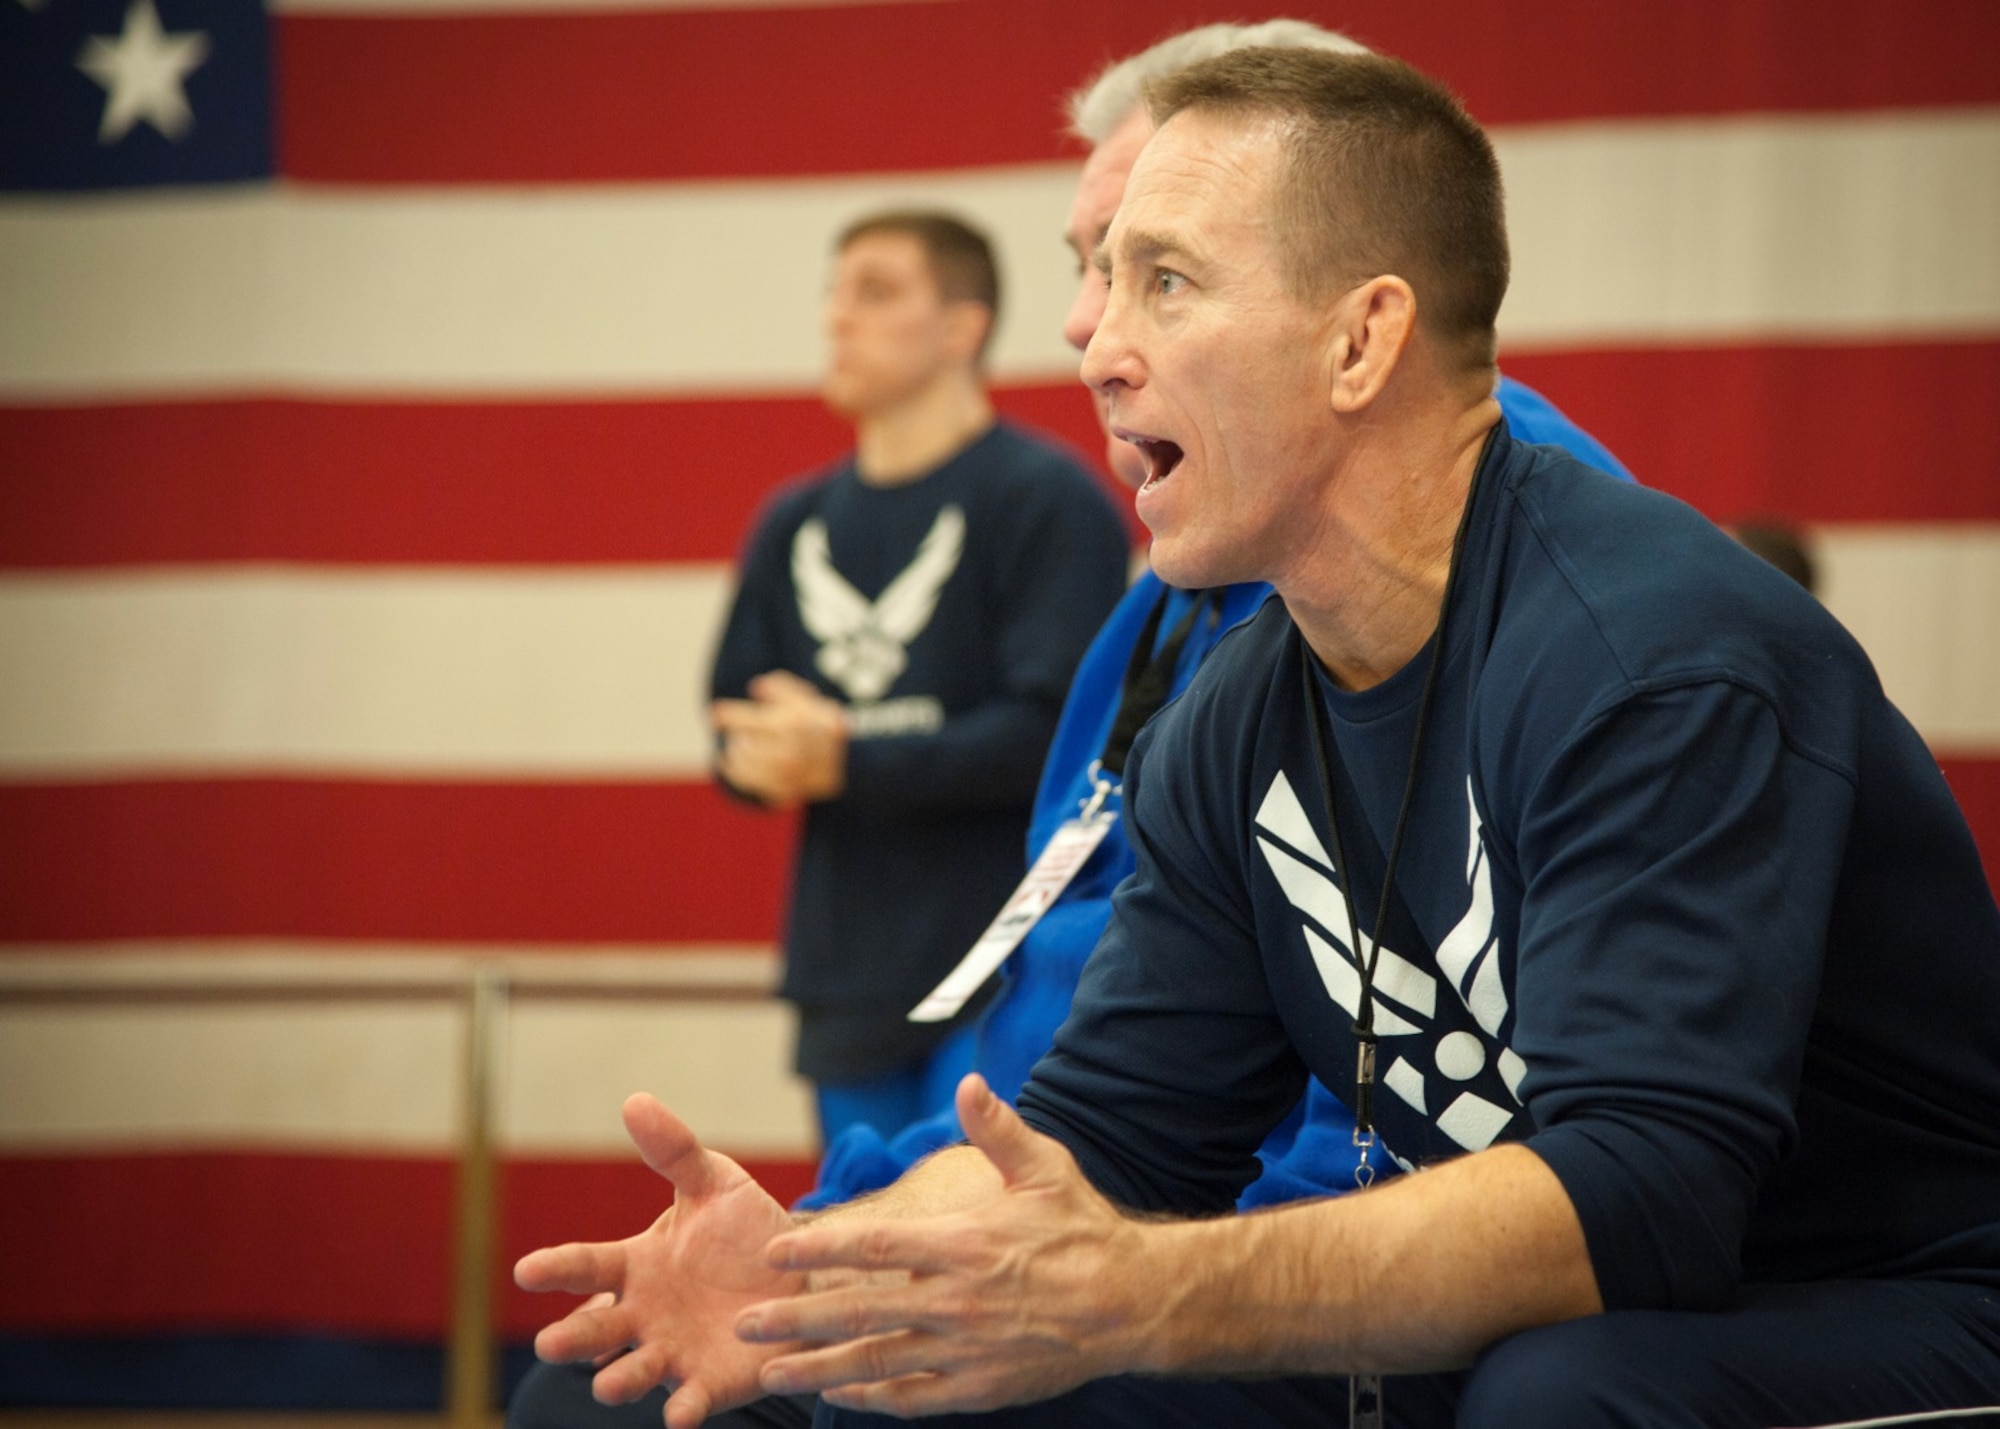 Air Force Wrestling Assistant Coach Senior Master Sgt. Steve Horton shouts instructions to one of his wrestlers during the 2015 Armed Forces Wrestling Championships at Fort Carson, Colorado, March 27. Horton is from Scott Air Force Base, Illinois. (U.S. Air Force photo/Staff Sgt. J. Aaron Breeden)